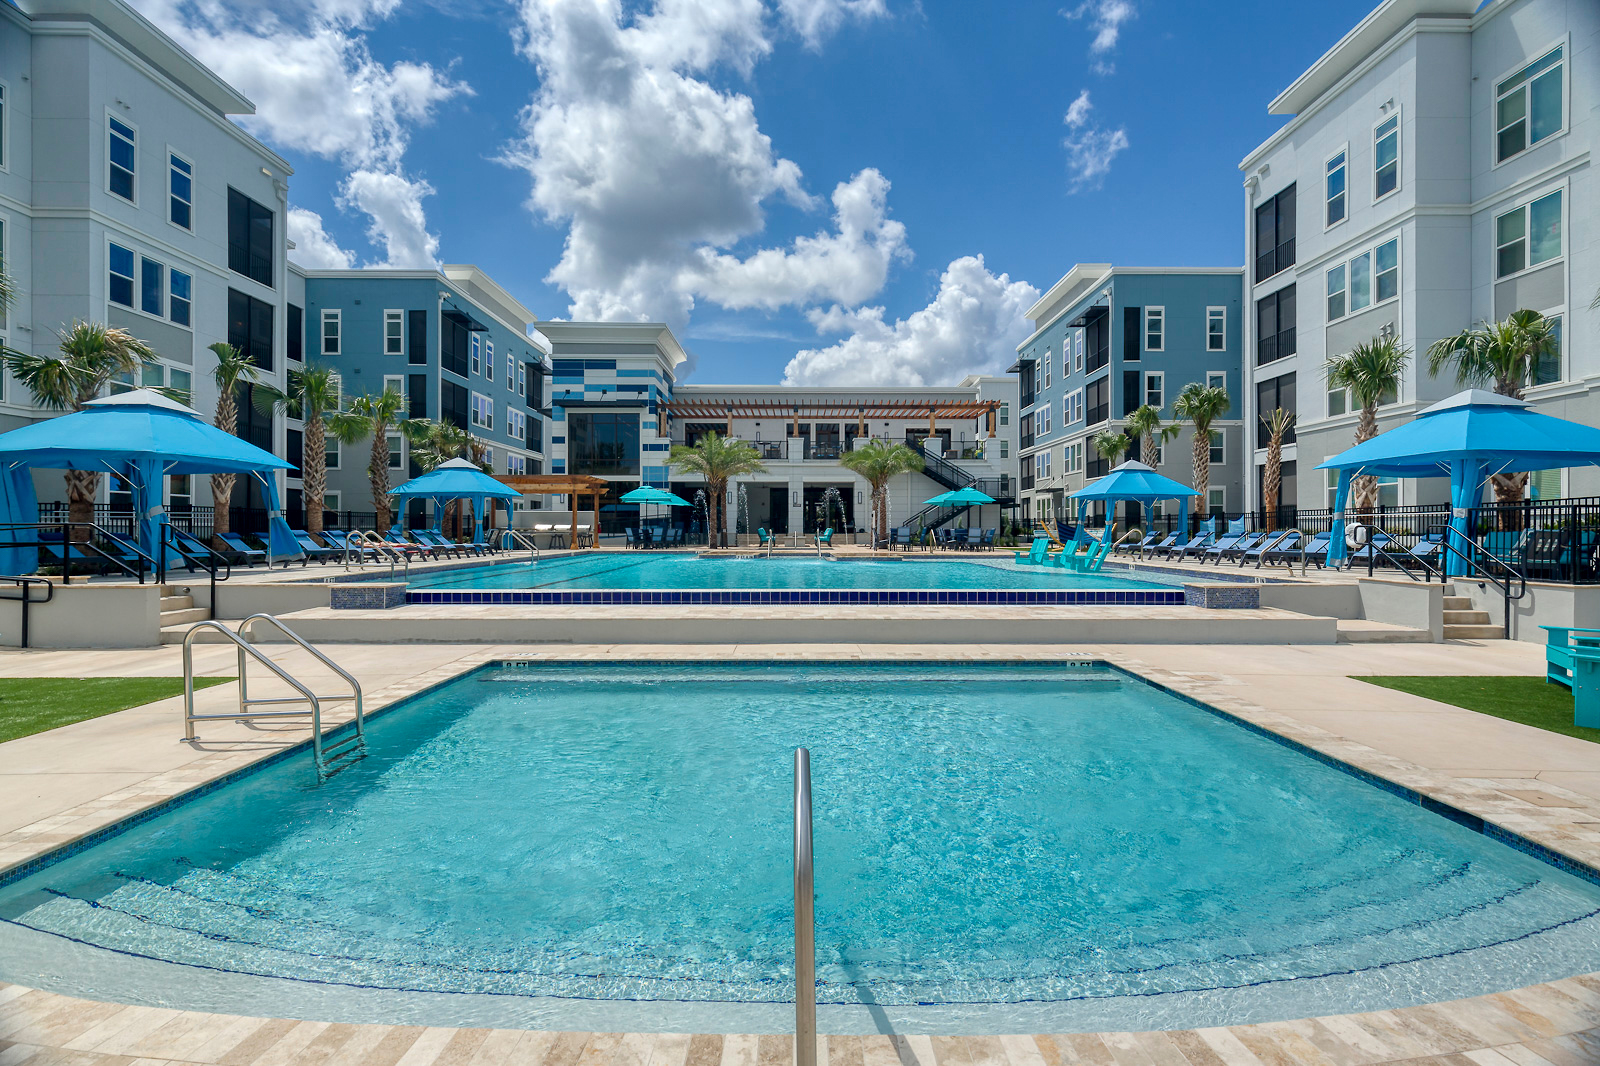 Multi story luxury apartments large open pool area